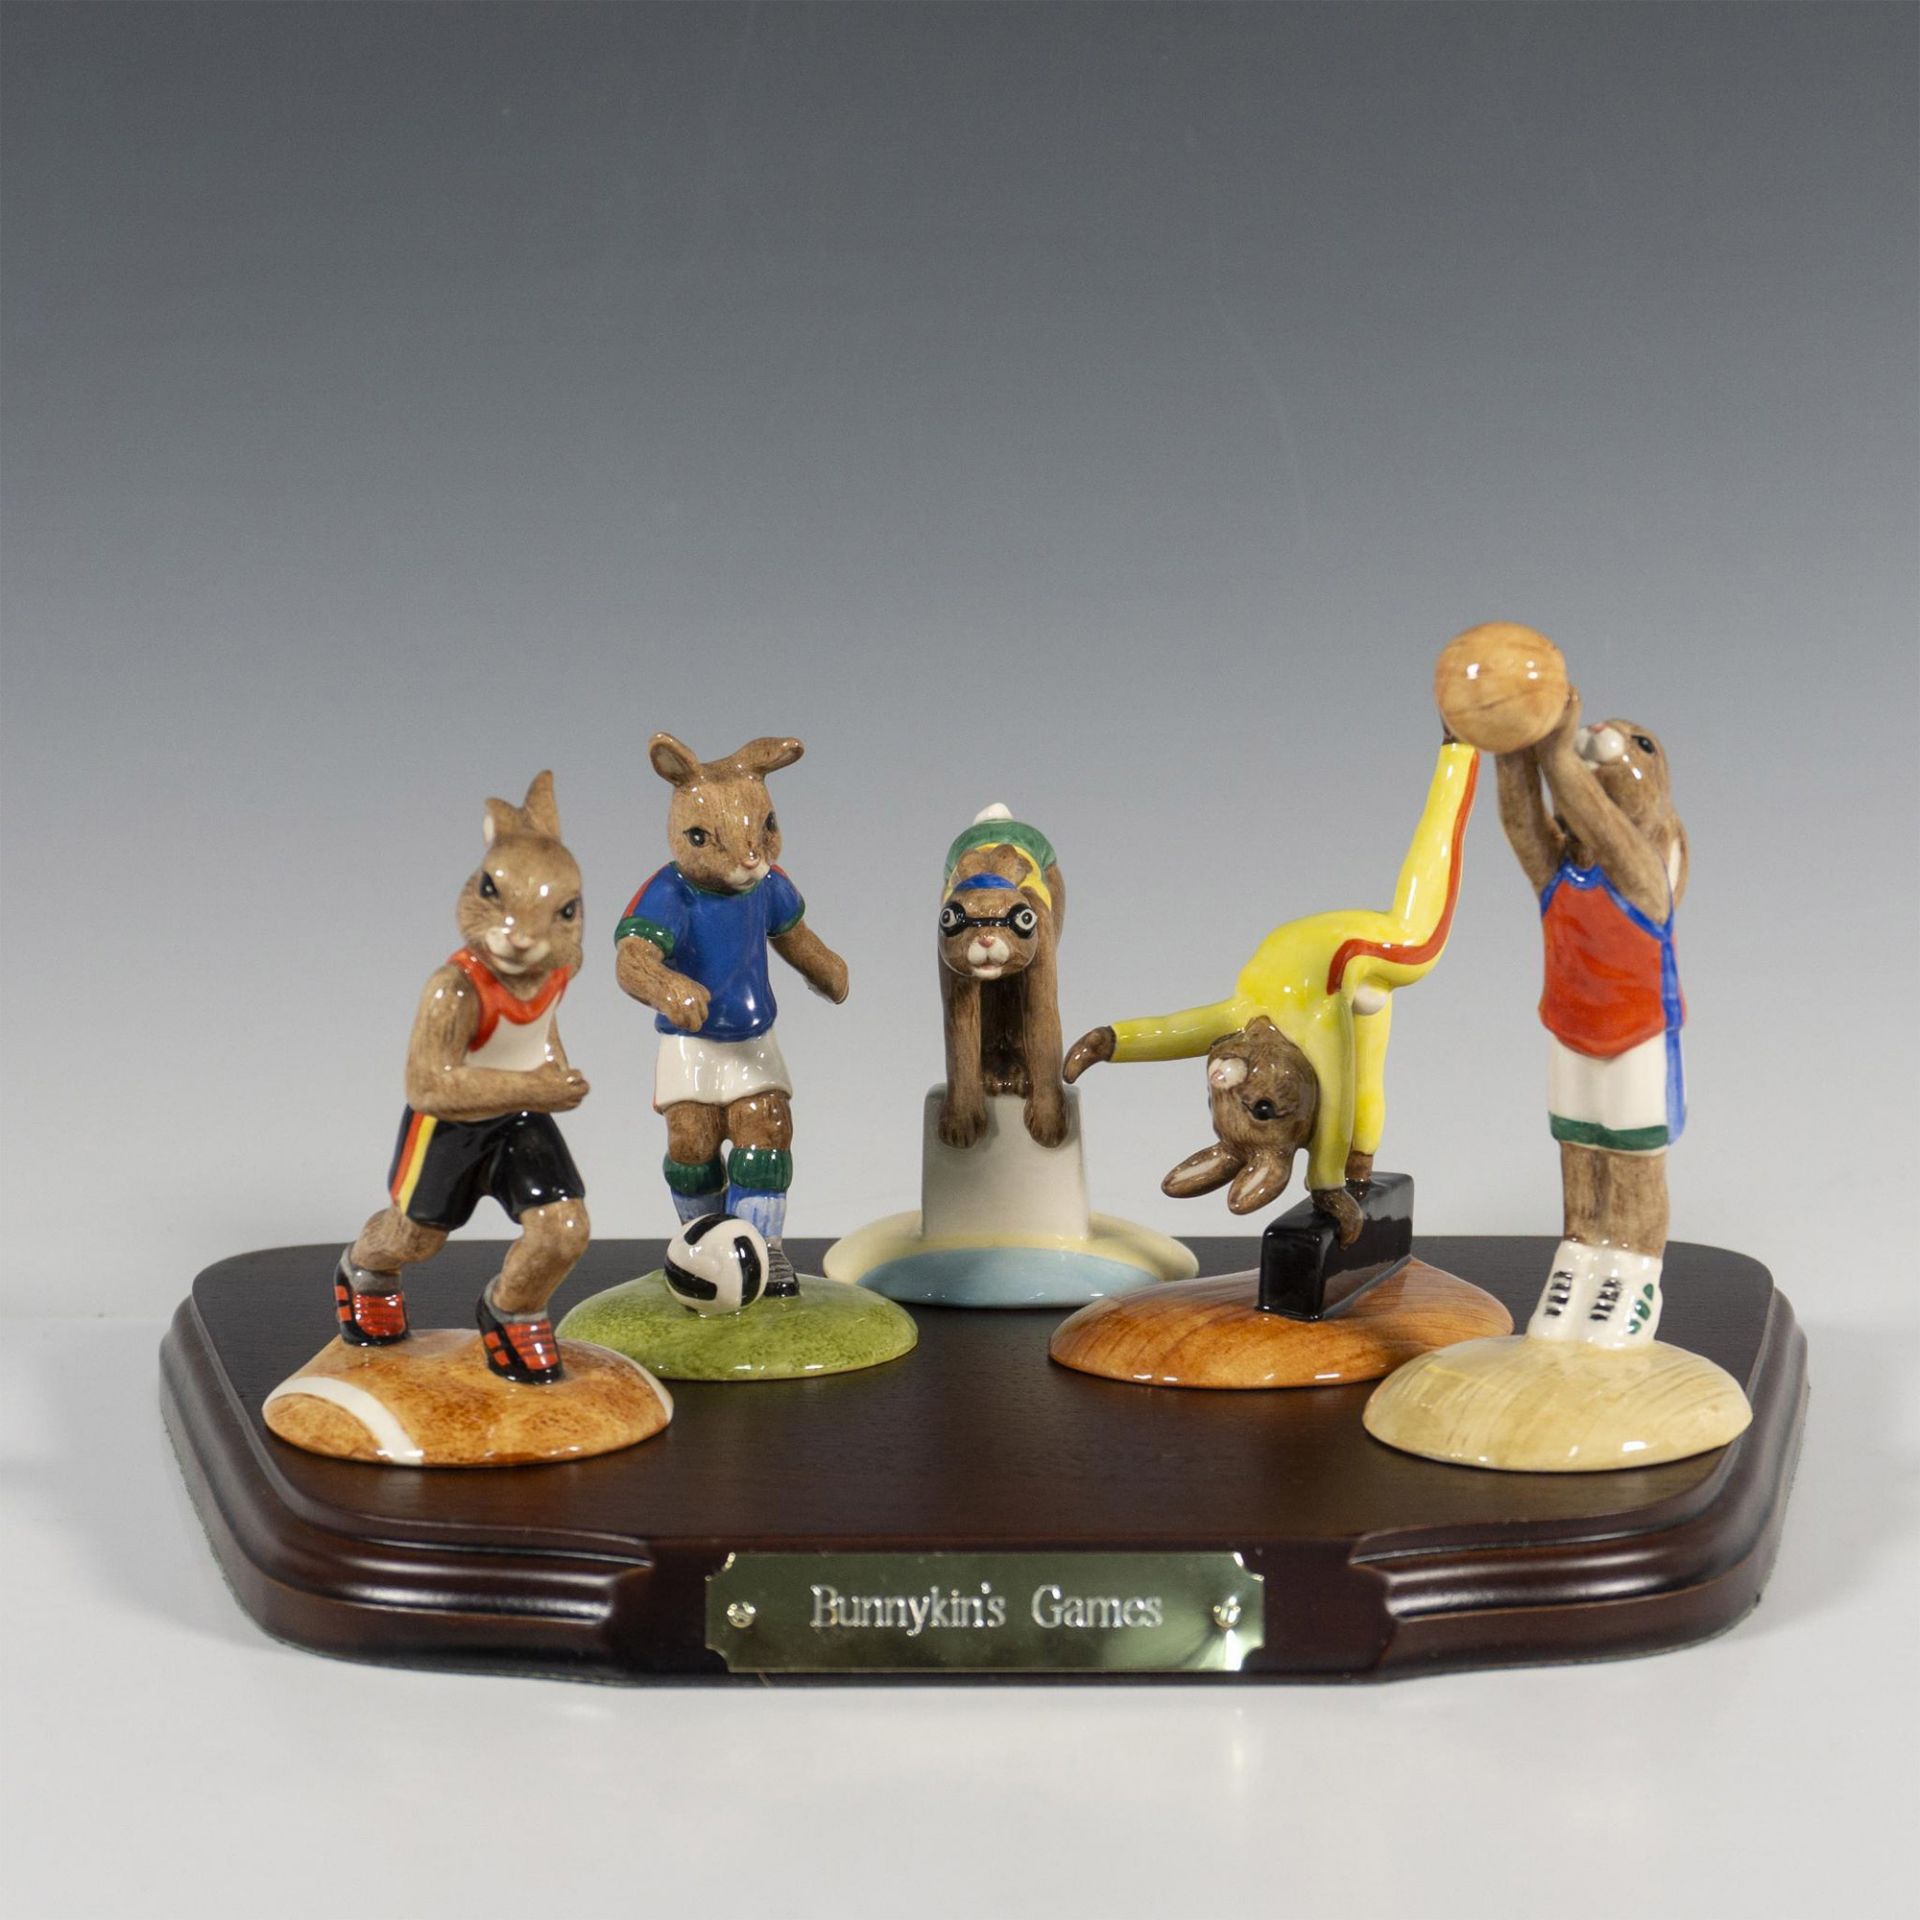 6pc Royal Doulton Bunnykins Olympic Games Figures & Base - Image 2 of 5